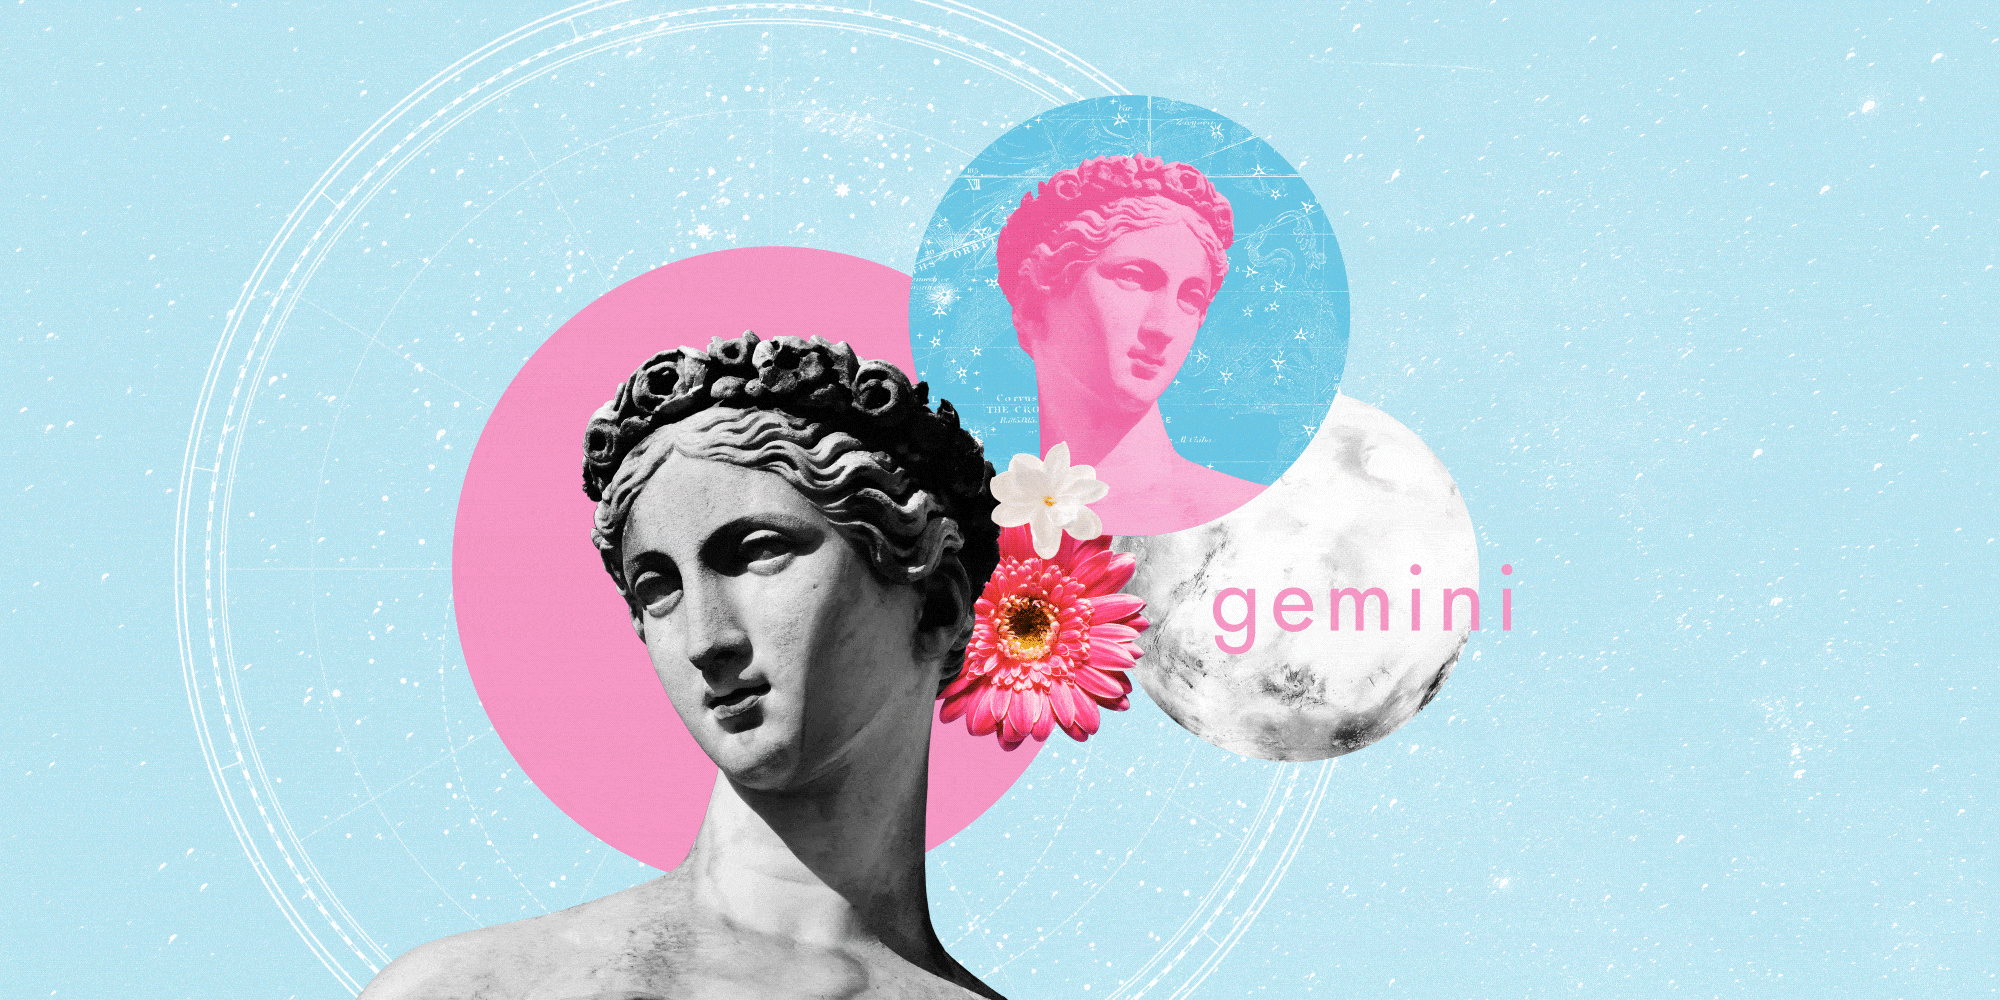 Your Gemini Monthly Horoscope for April